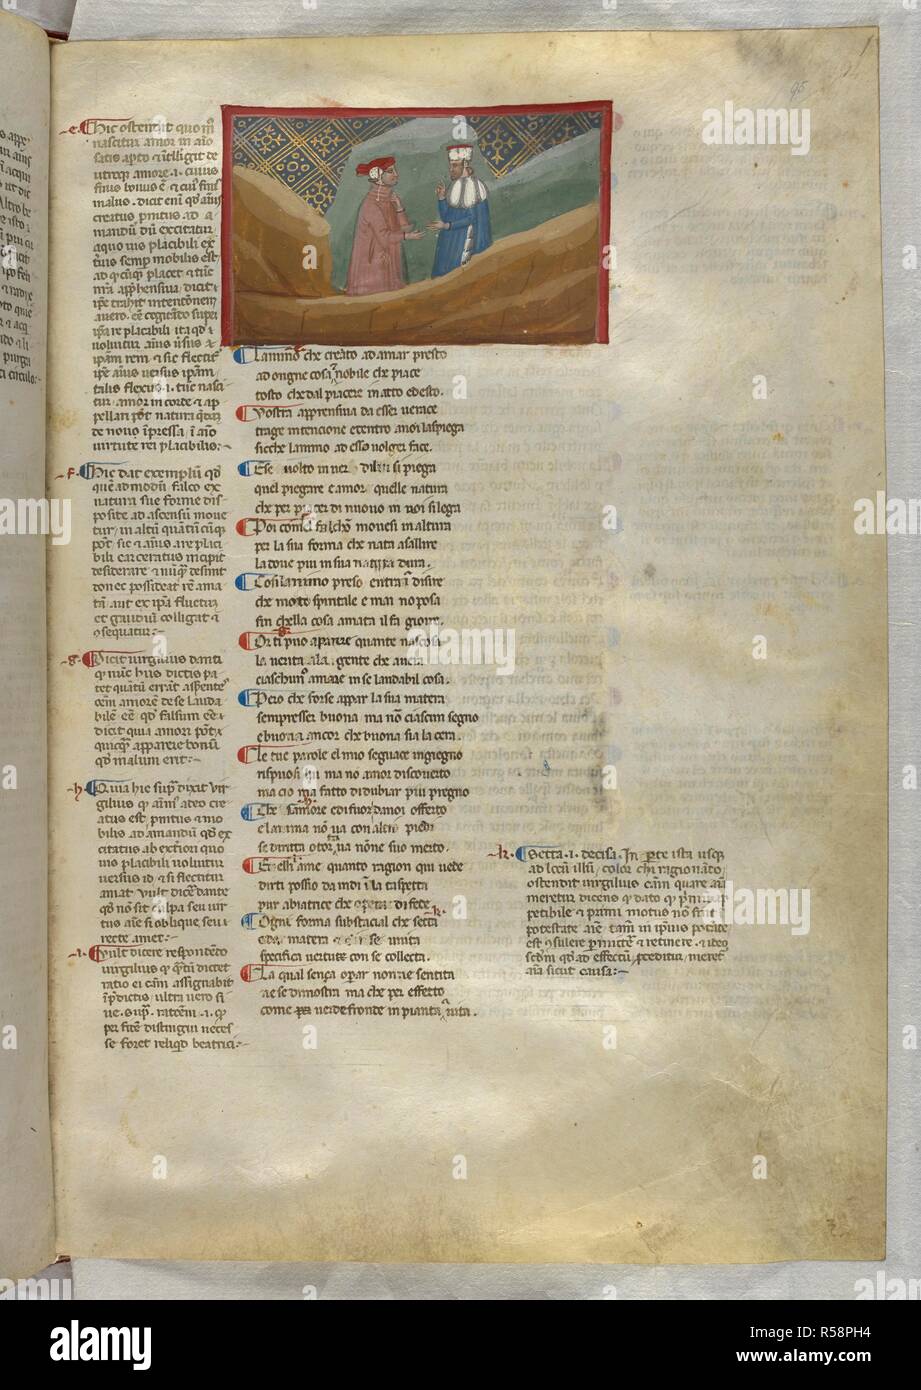 Purgatorio: Dante and Virgil talking about the nature of love. Dante Alighieri, Divina Commedia ( The Divine Comedy ), with a commentary in Latin. 1st half of the 14th century. Source: Egerton 943, f.95. Language: Italian, Latin. Stock Photo